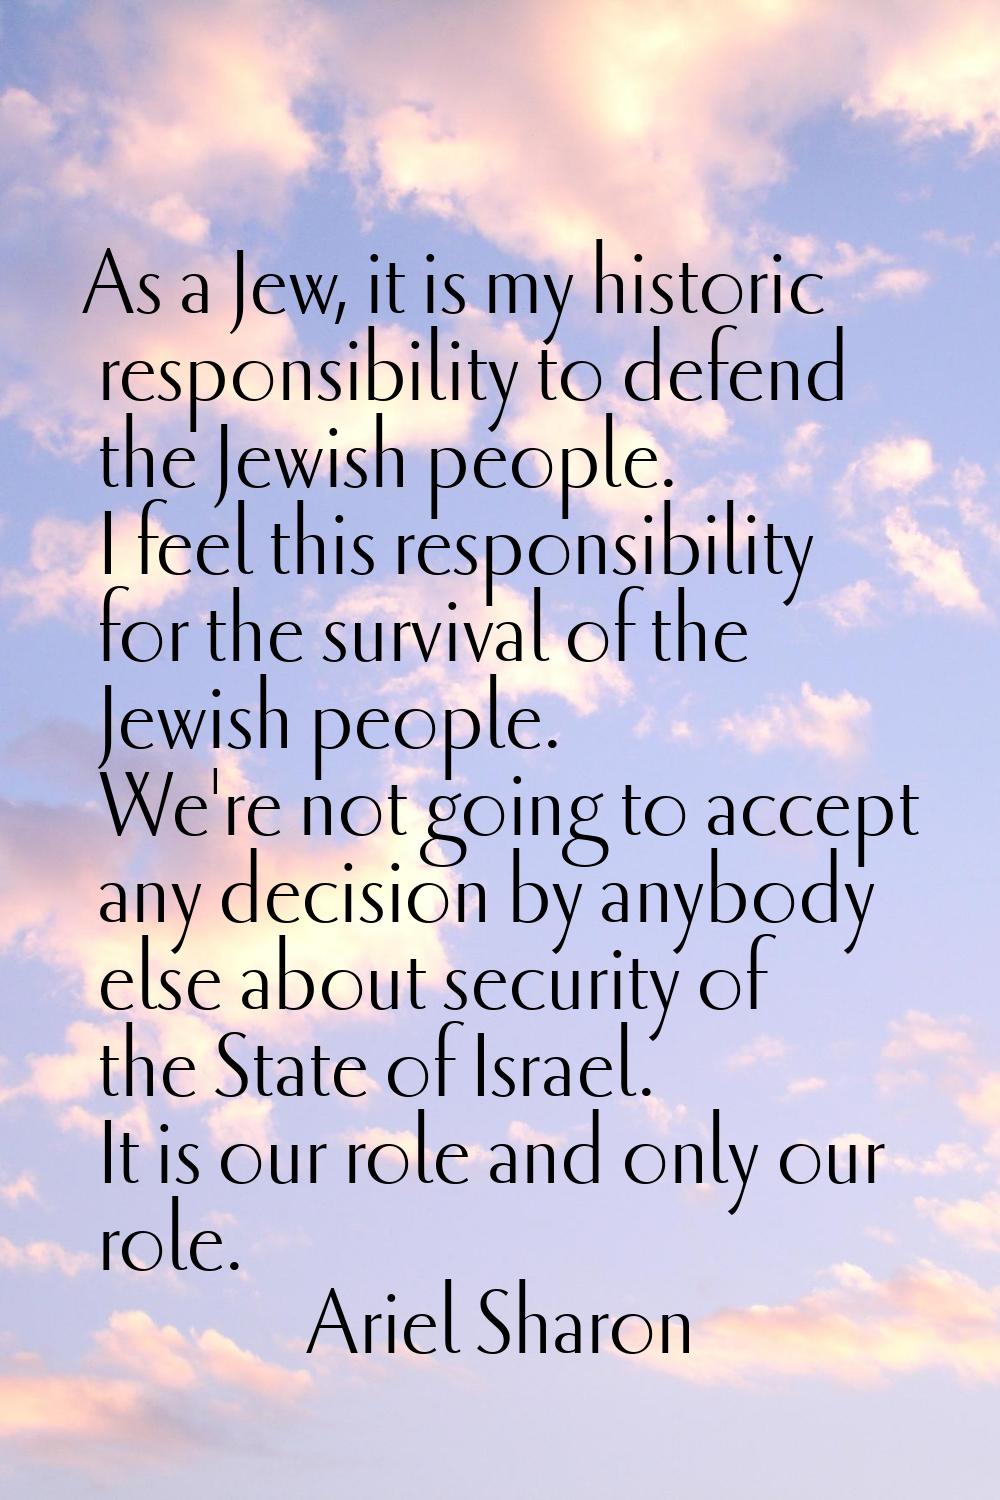 As a Jew, it is my historic responsibility to defend the Jewish people. I feel this responsibility 